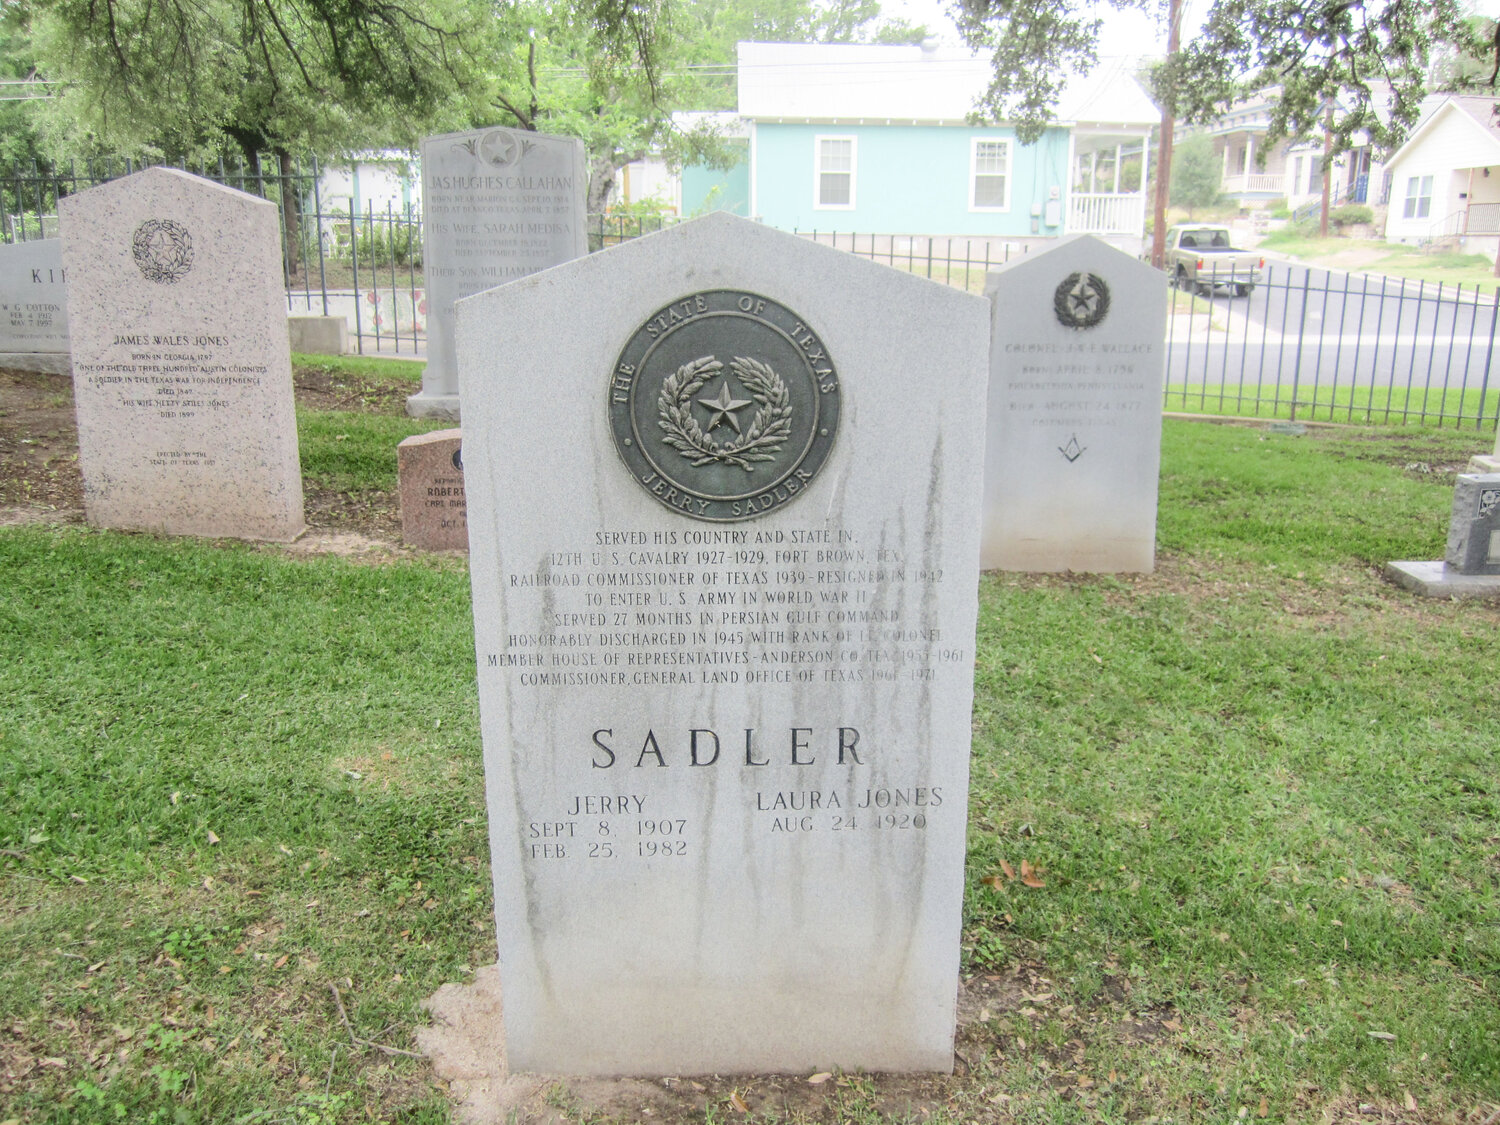 The gravestone of Jerry Sadler, who gave a speech in Granbury in 1940 during his campaign for governor of Texas, is pictured, from its location in the Texas State Cemetery in Austin. Sadler served the country with two stints in the Army, then went on to be elected to the Texas House of Representatives before being commissioner of the Texas General Land Office from 1961-1971.